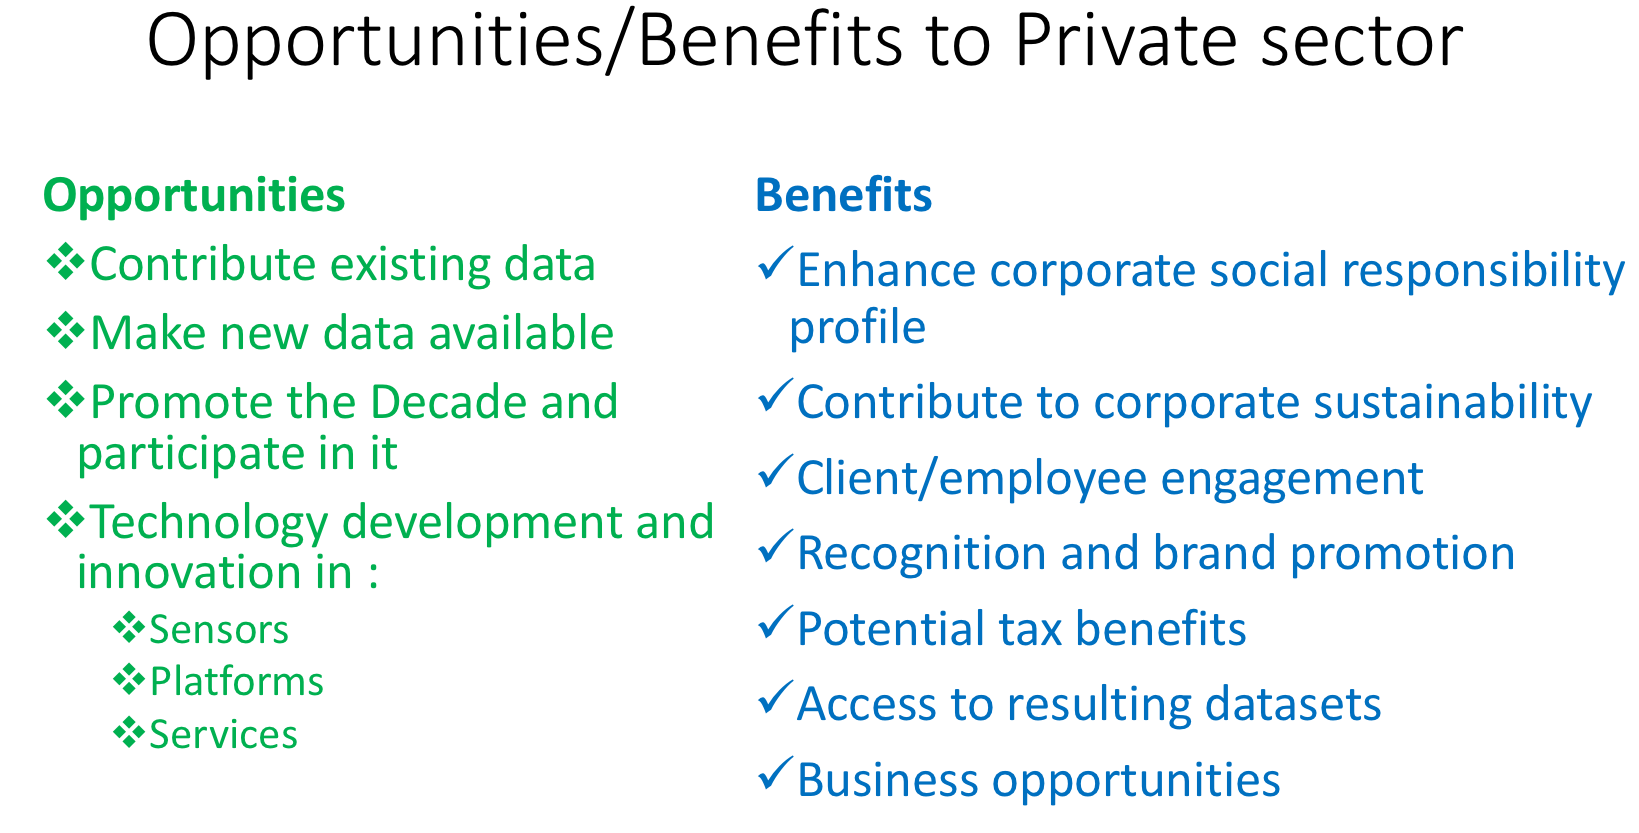 Opportunities/benefits to the Private sector by participating in the Decade